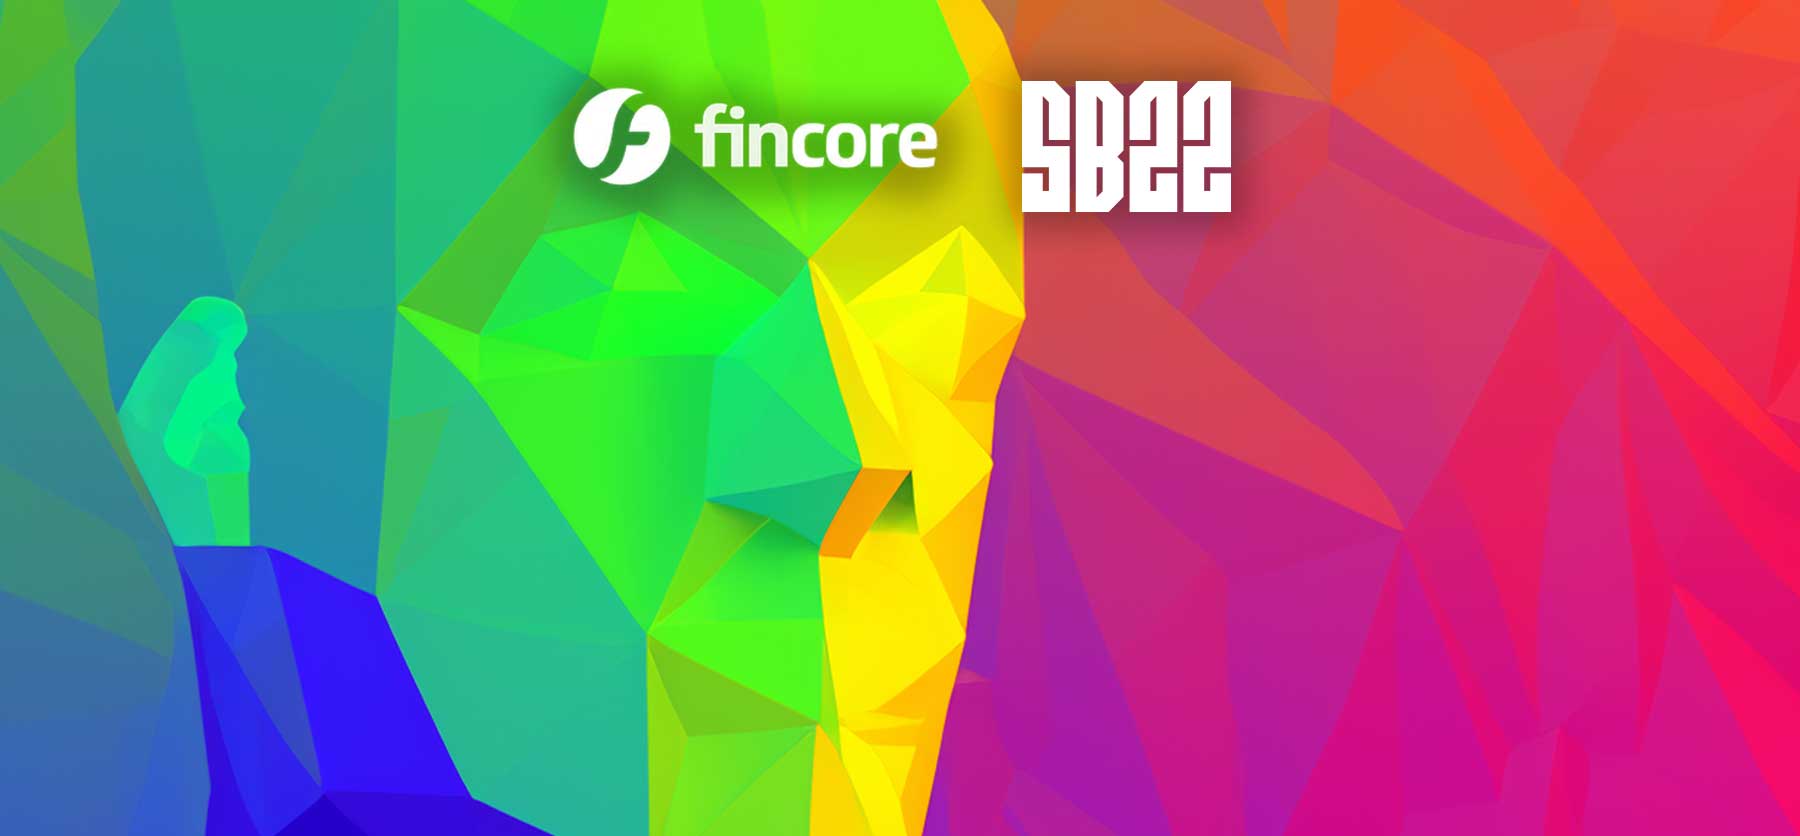 SB22 Enters Industry First, Biometrics Partnership With Fincore